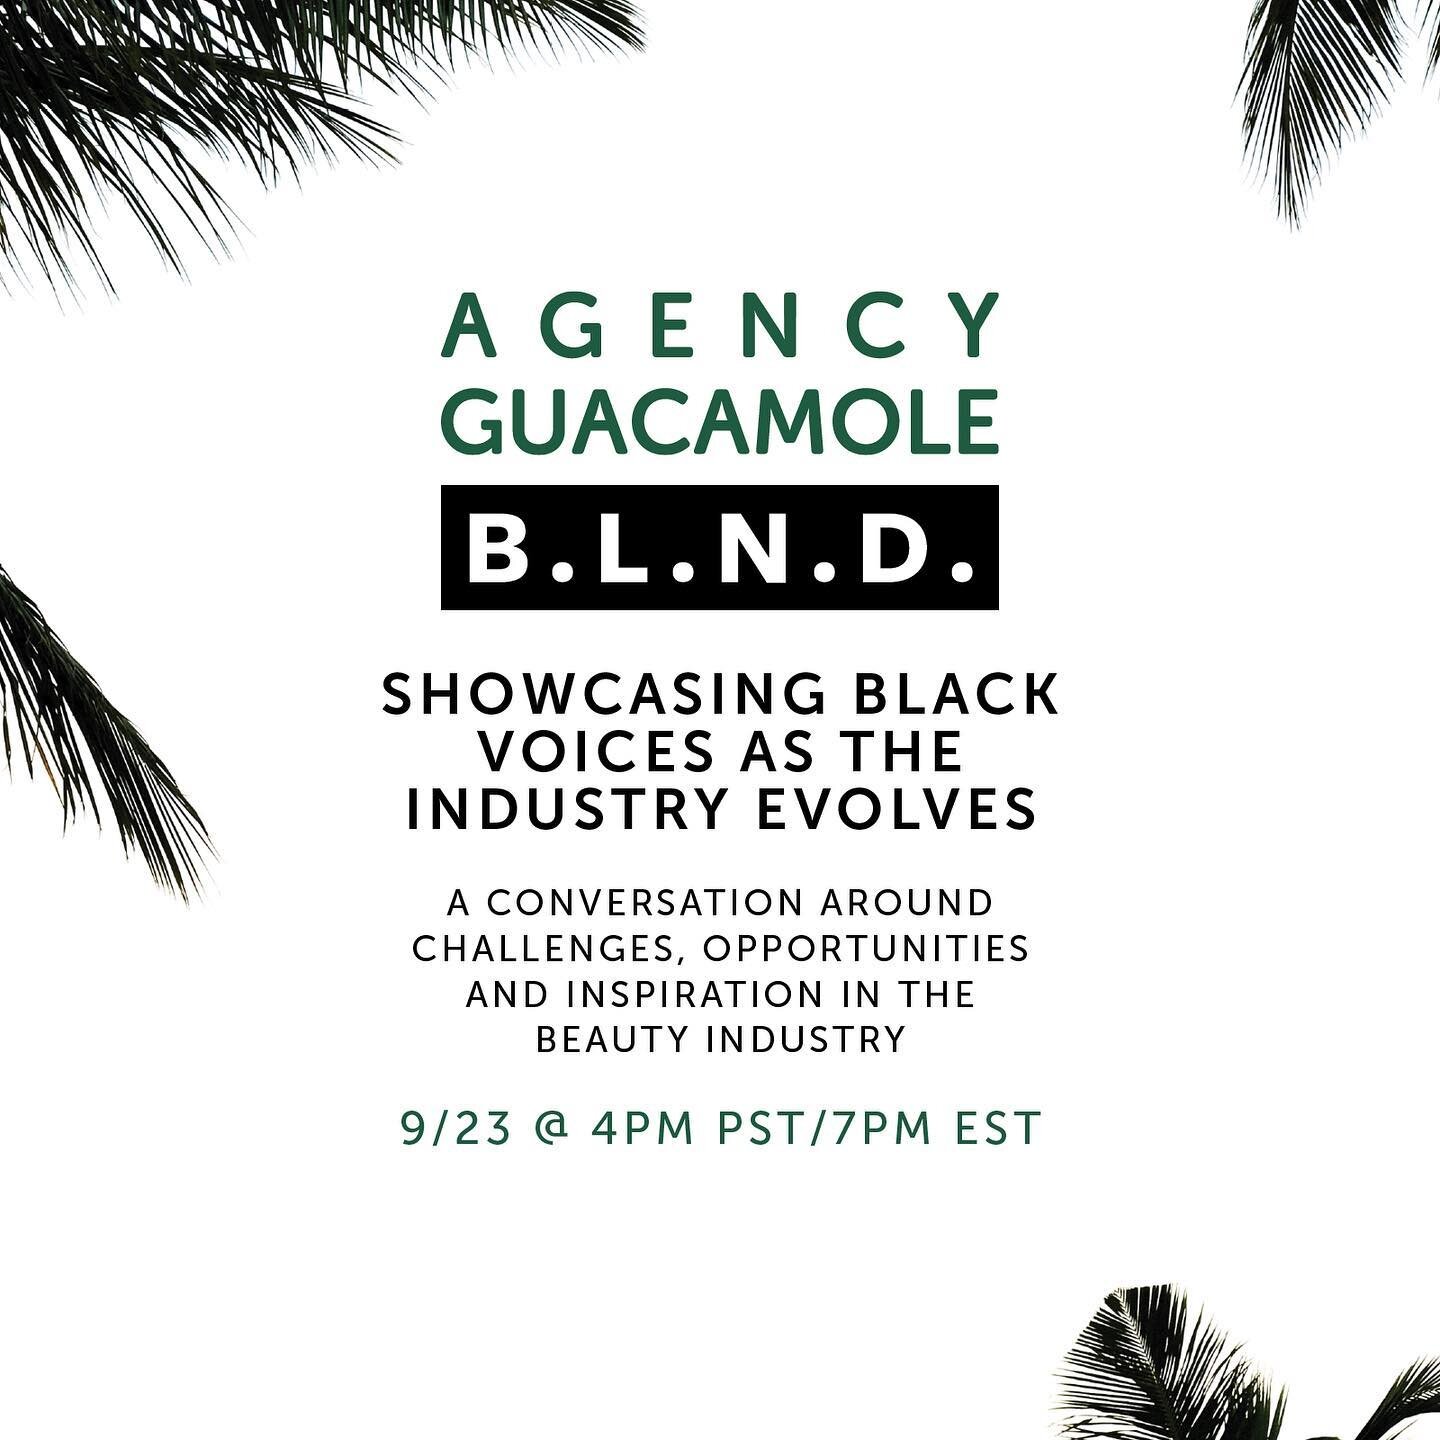 Swipe through and meet our B.L.N.D. 2020 Moderator &amp; Panelists!&nbsp;✨We're so excited to present our 3rd B.L.N.D. event on 9/23&mdash;virtually, of course. While it has always been a conversation around challenges, opportunities &amp; inspiratio